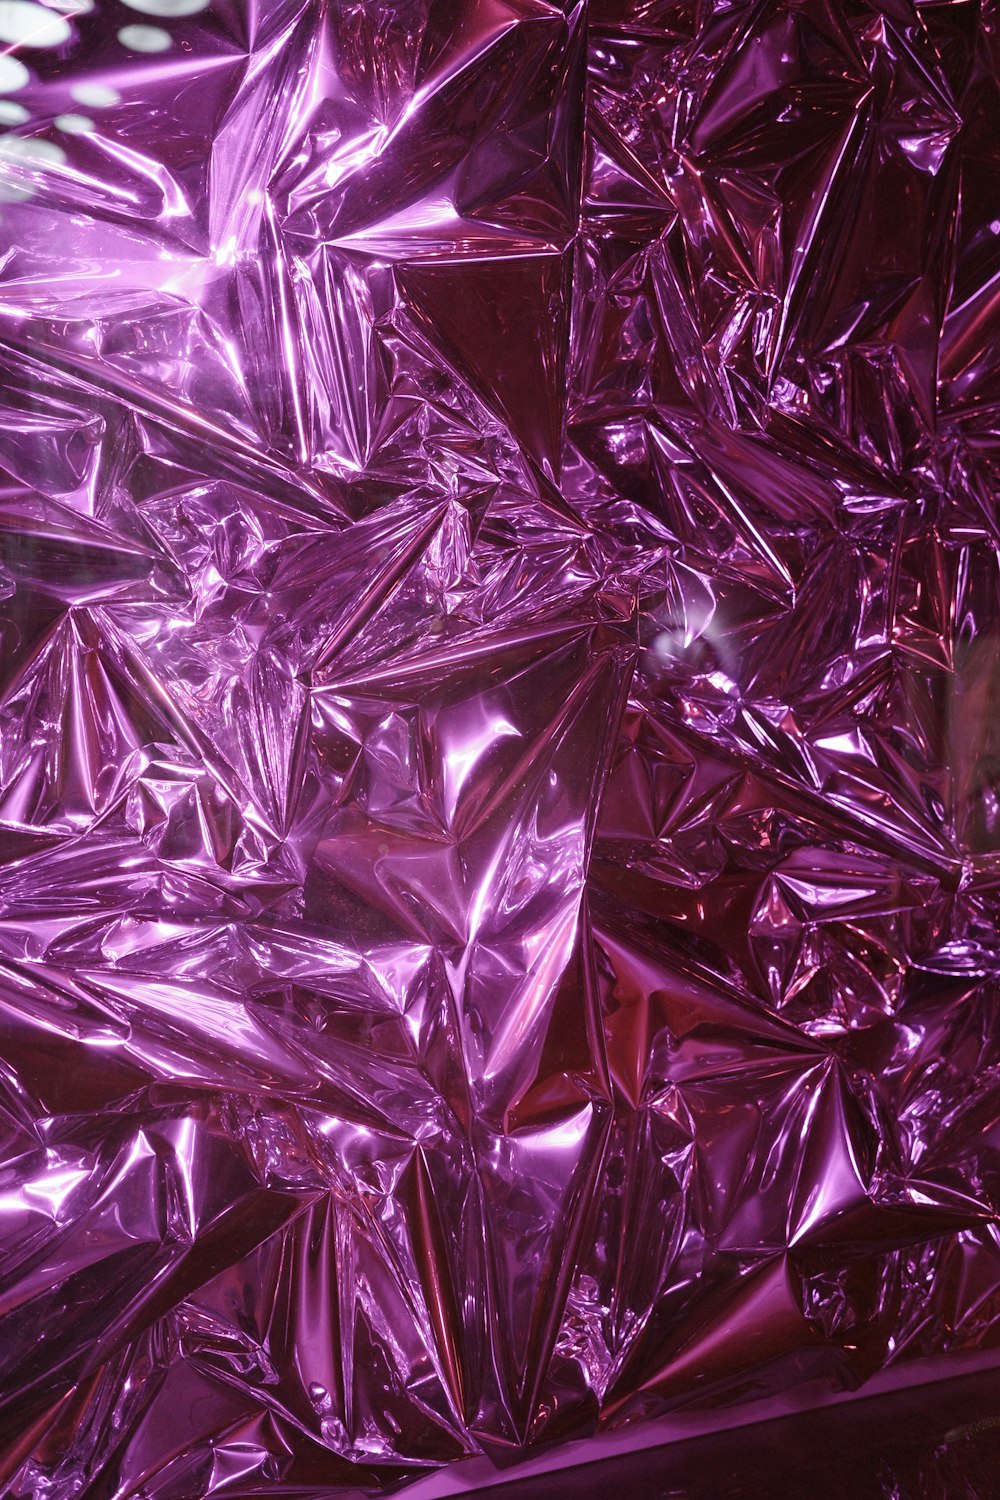 a close up view of a shiny purple surface